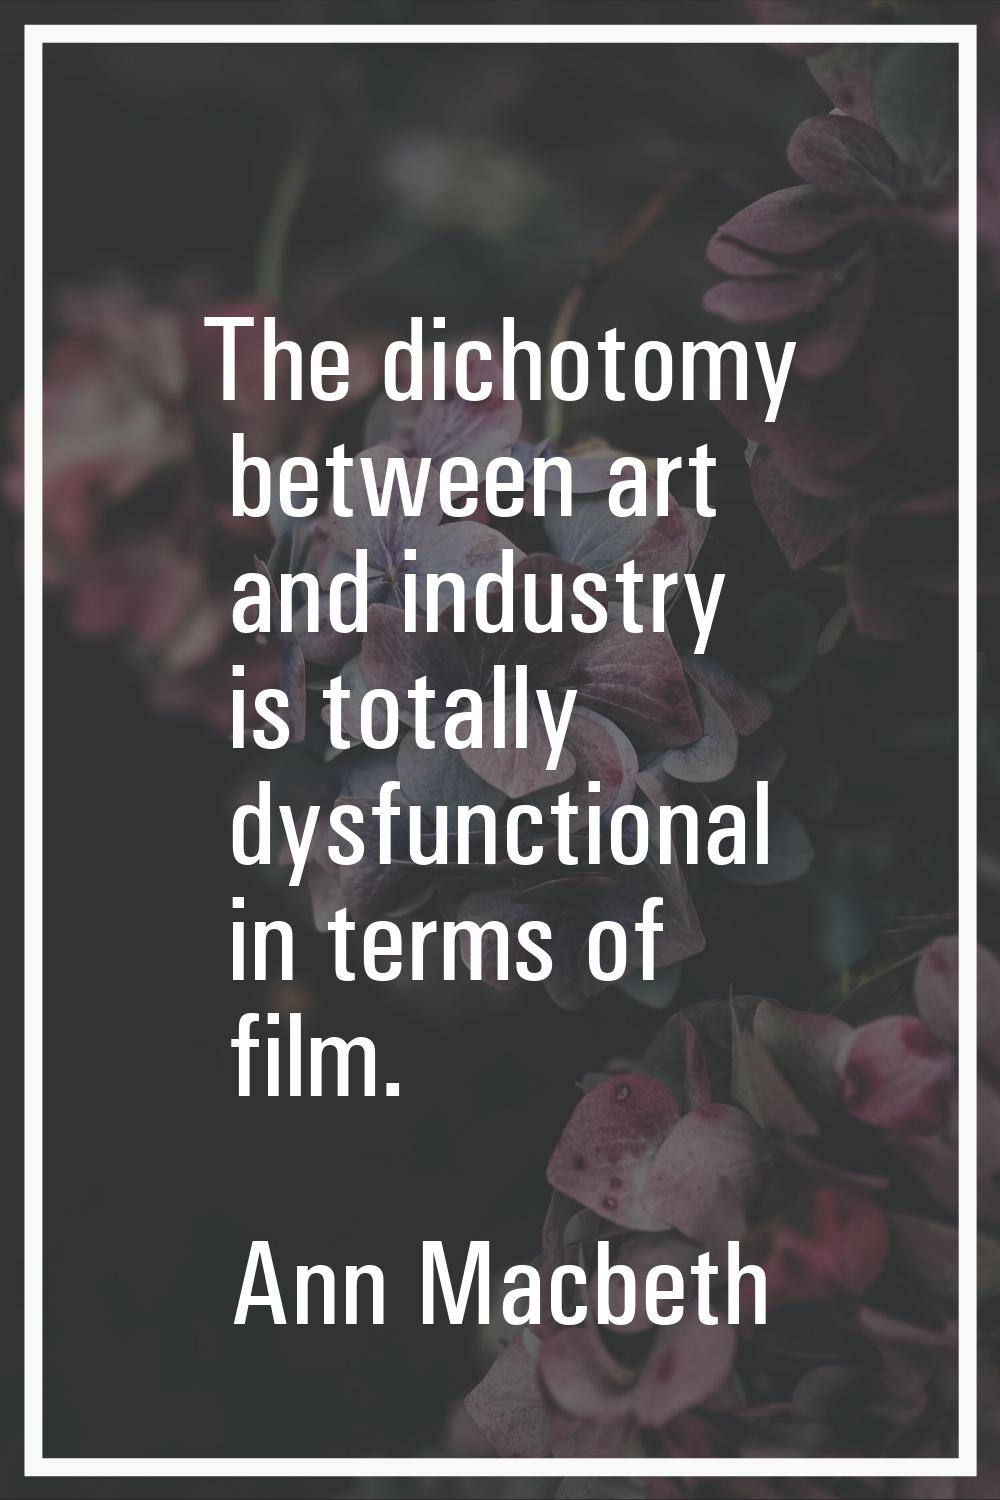 The dichotomy between art and industry is totally dysfunctional in terms of film.